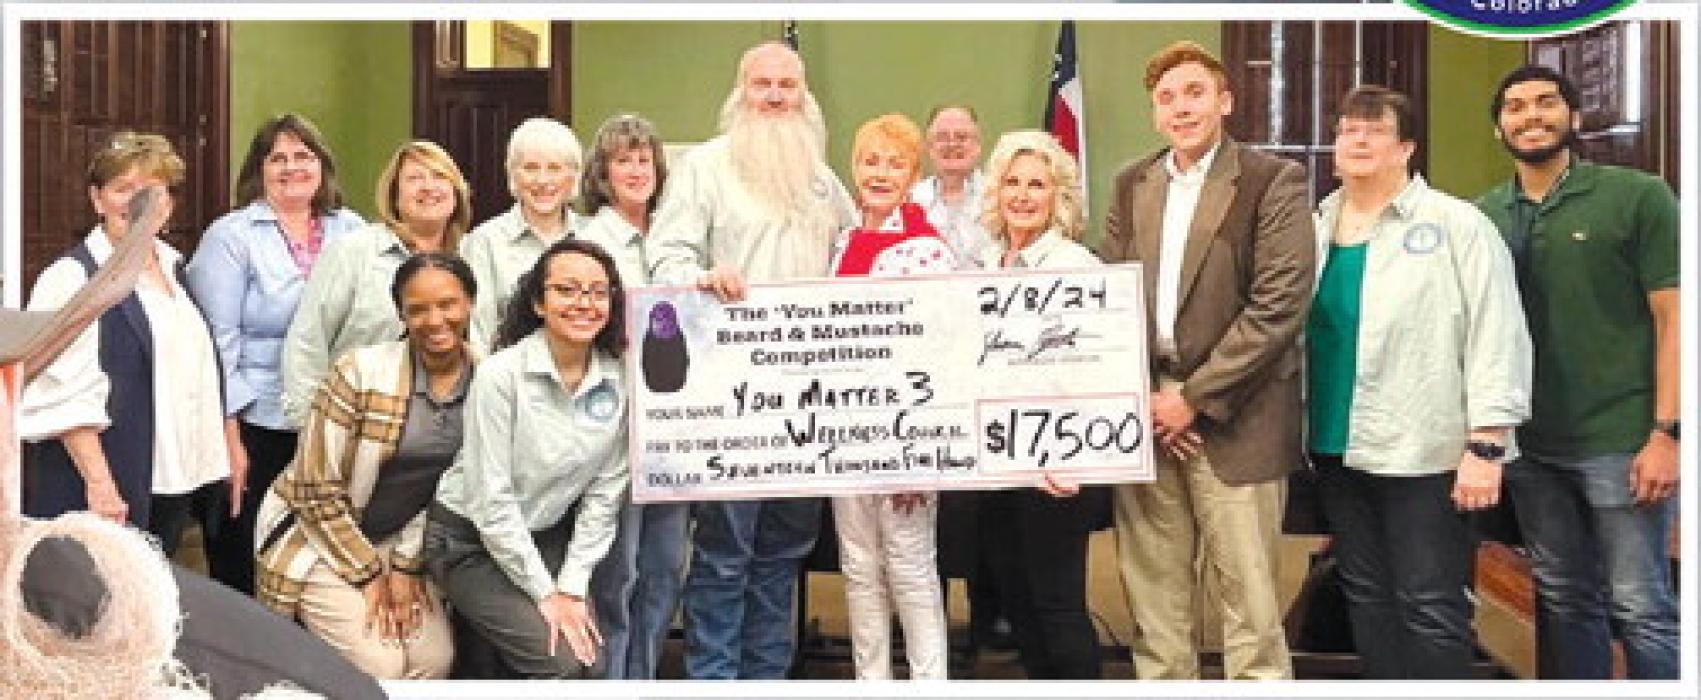 Beard And Moustache Competition Raises $17,500 for The Wellness Council of the Greater Colorado Valley